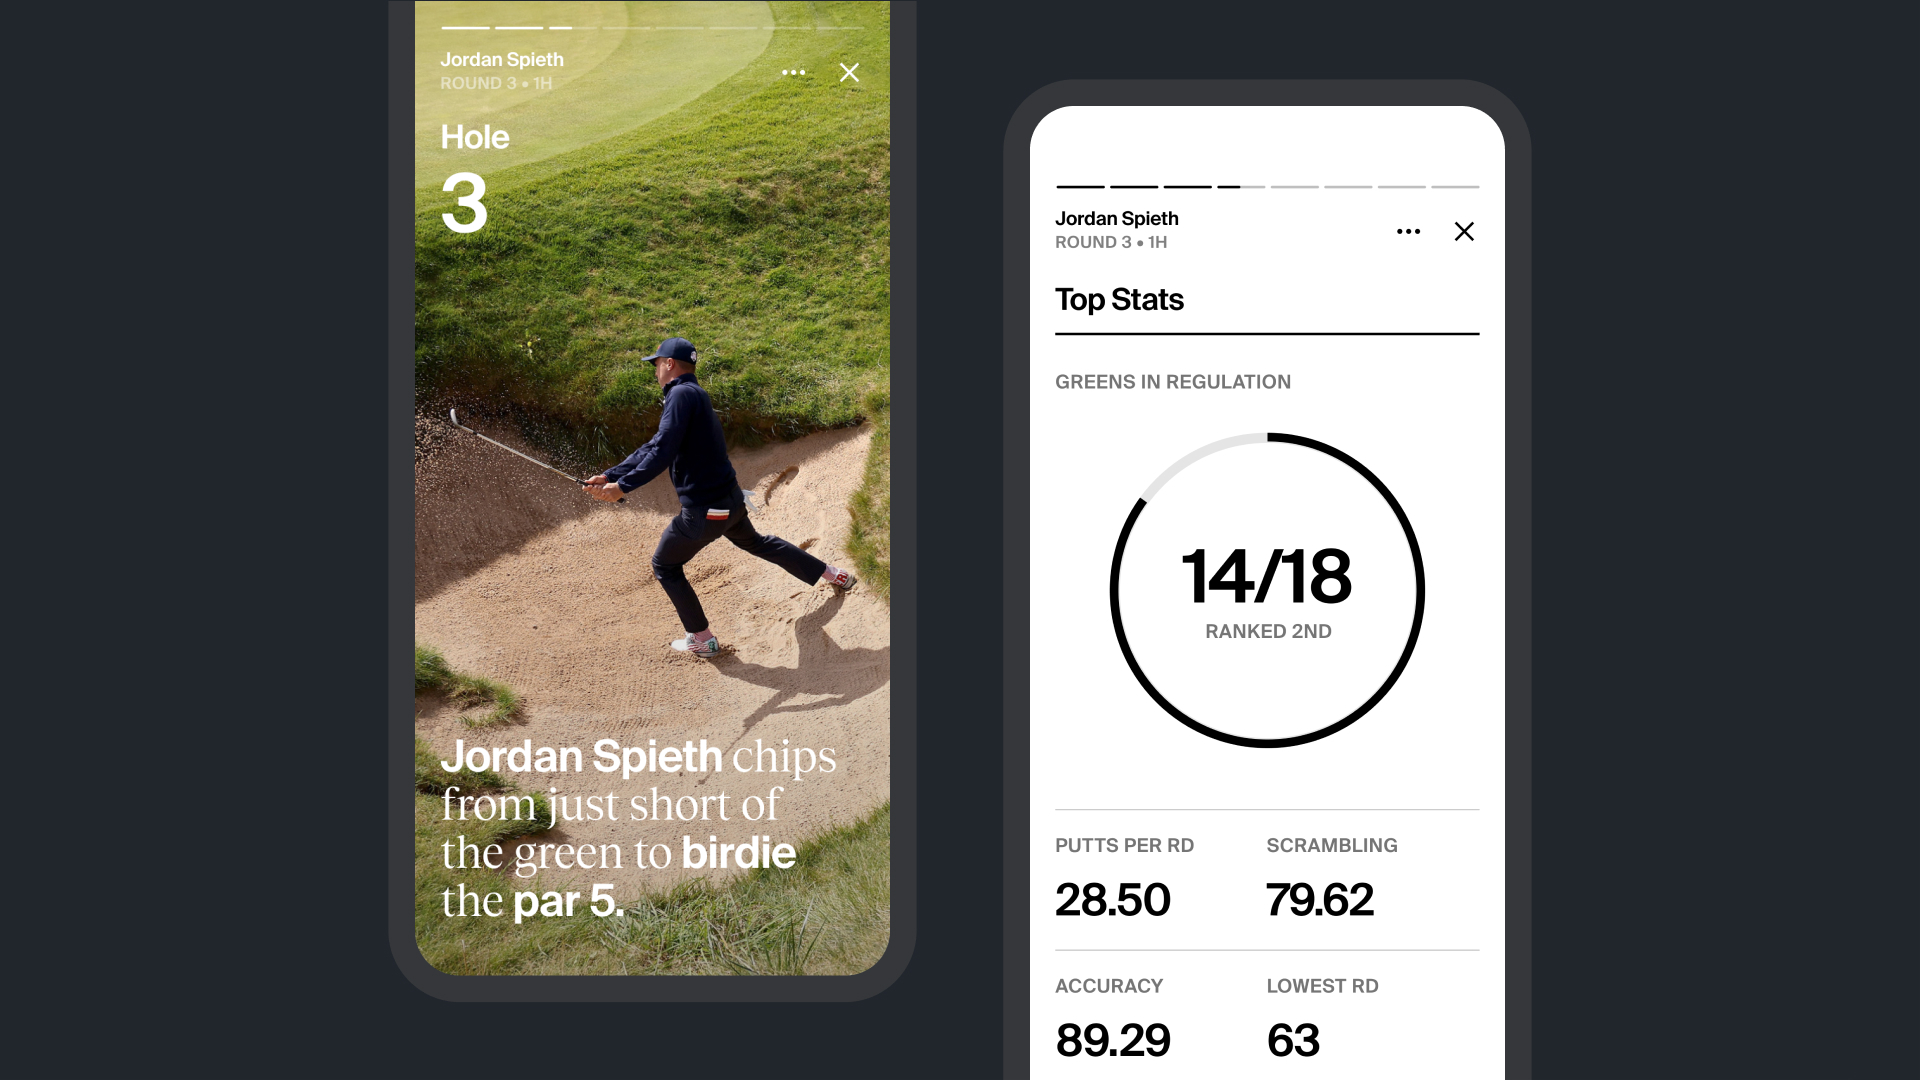 more product images of PGA TOUR's digital experience